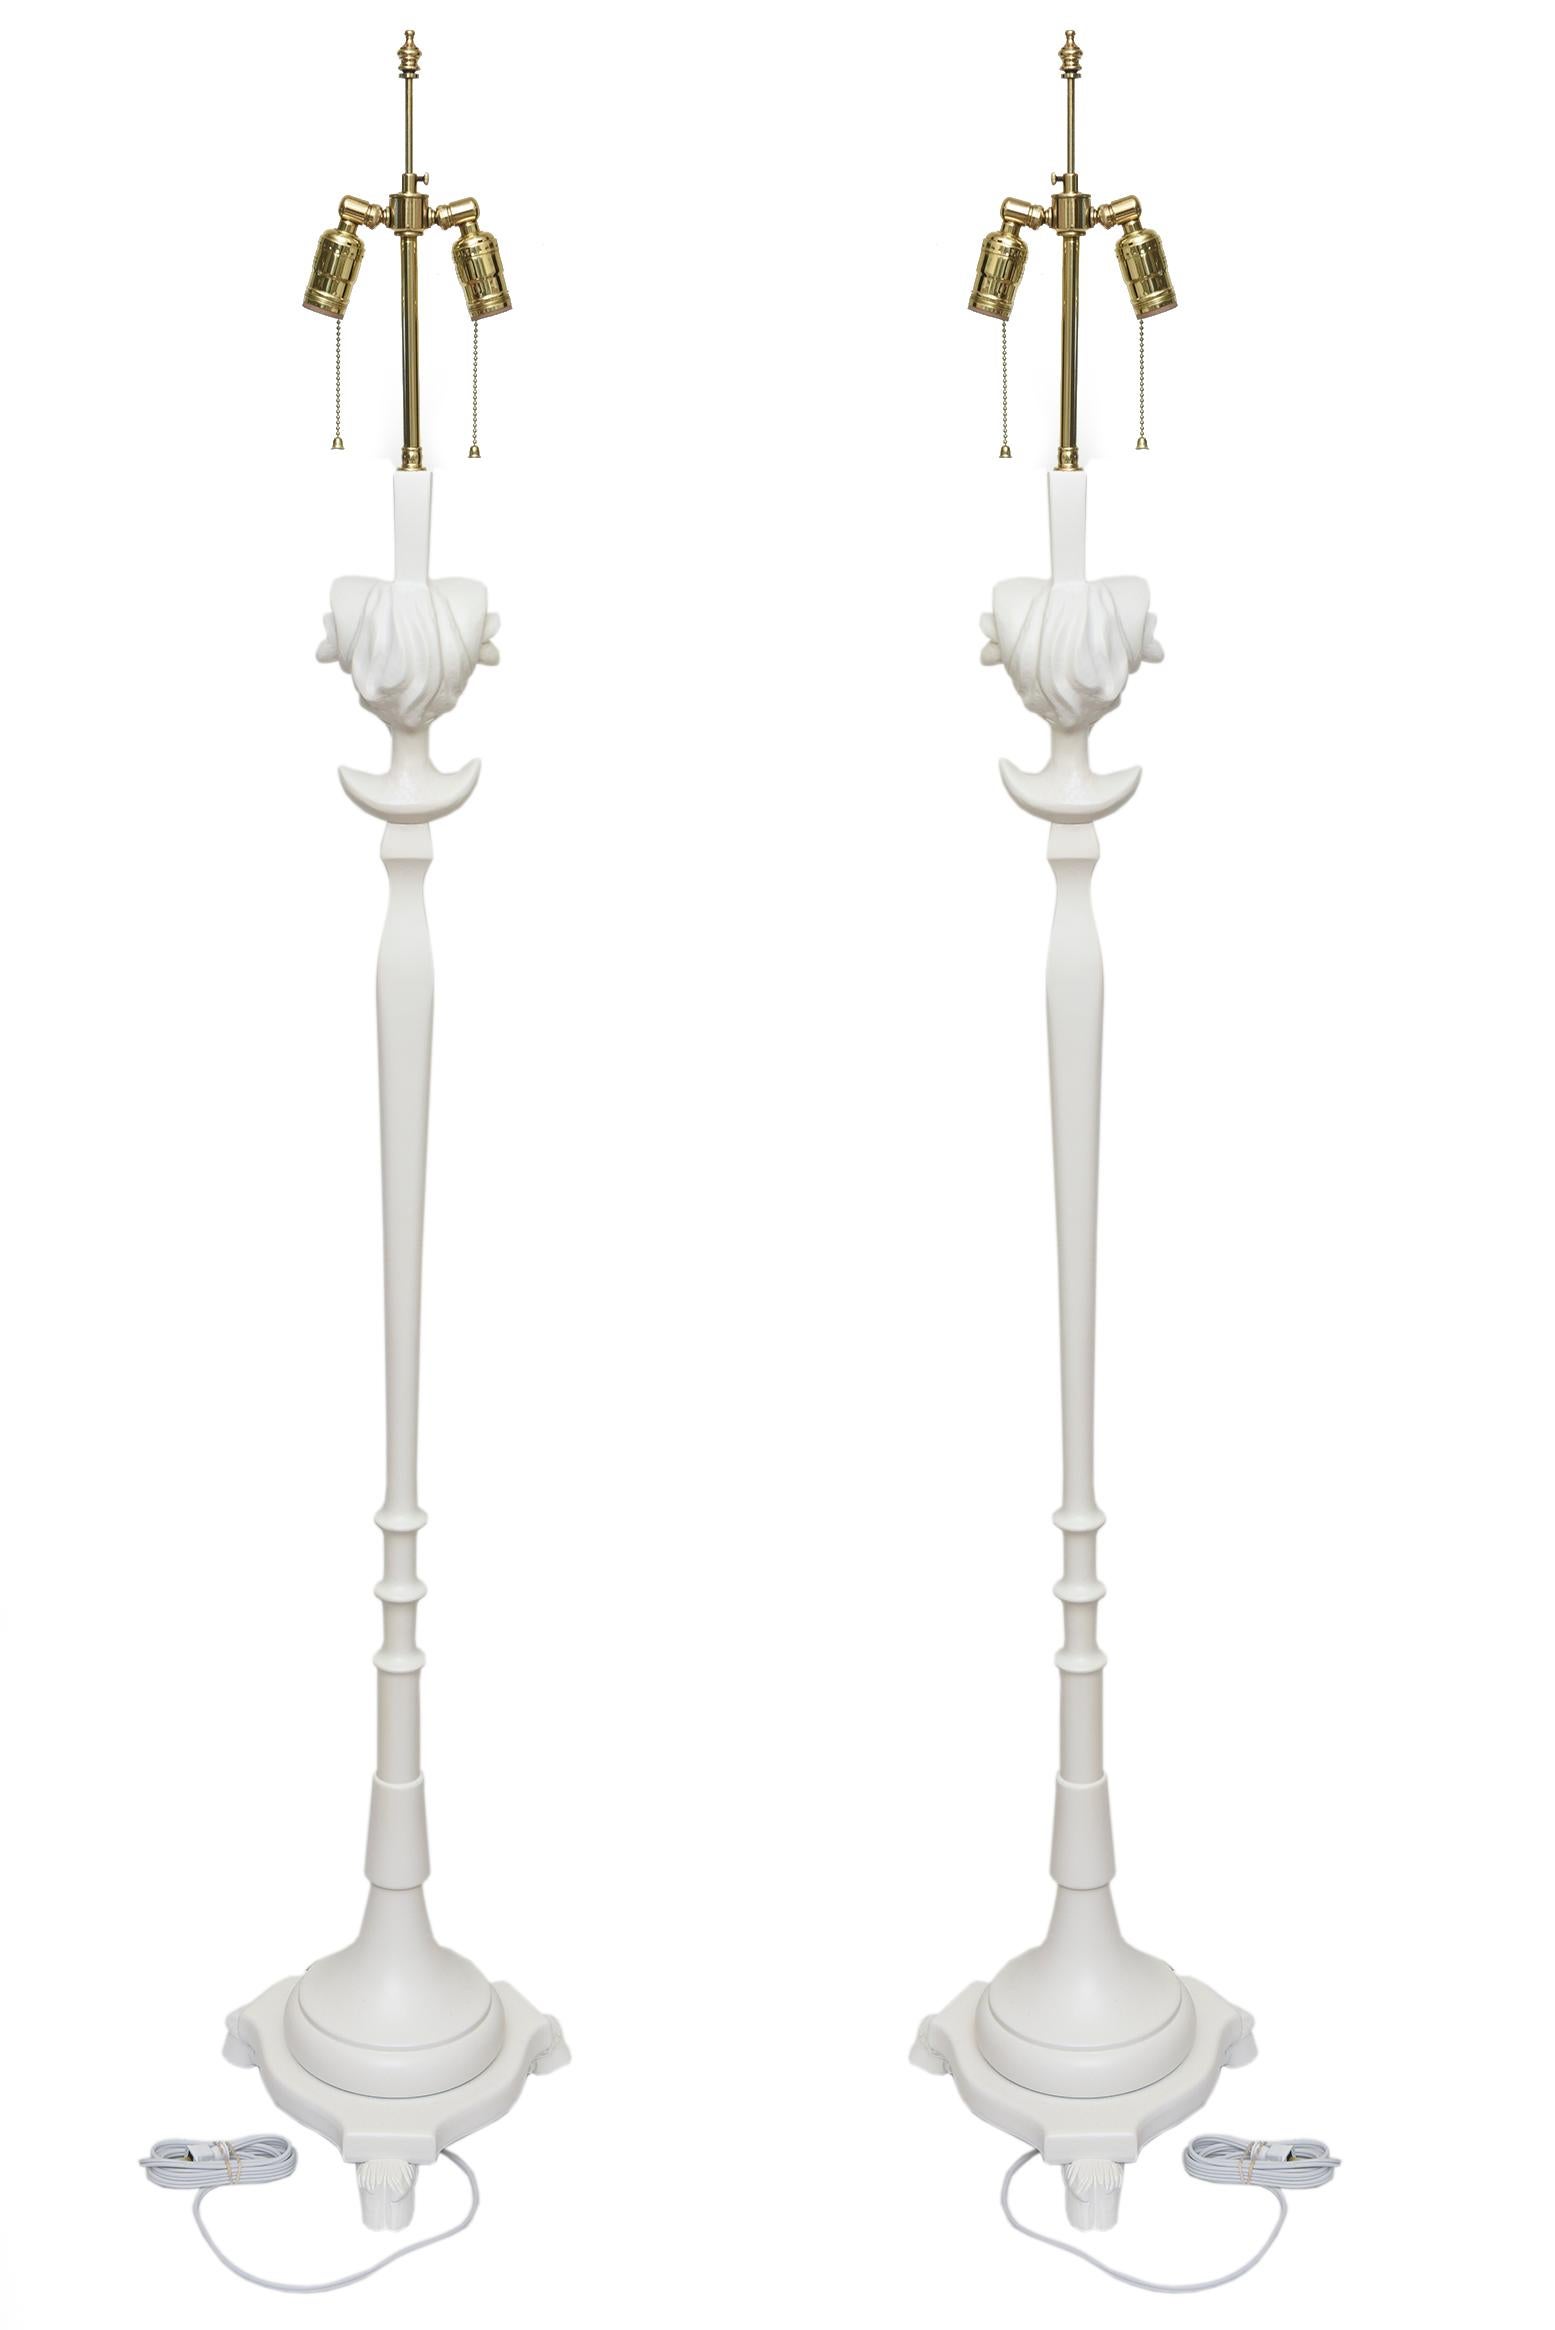 This fantastic pair of fully restored Sirmos vintage matt white painted Rams Head floor lamps are from 1975. The original brass armature fittings have all been polished and the lamps have been rewired. They are in the style of the plaster lamps by